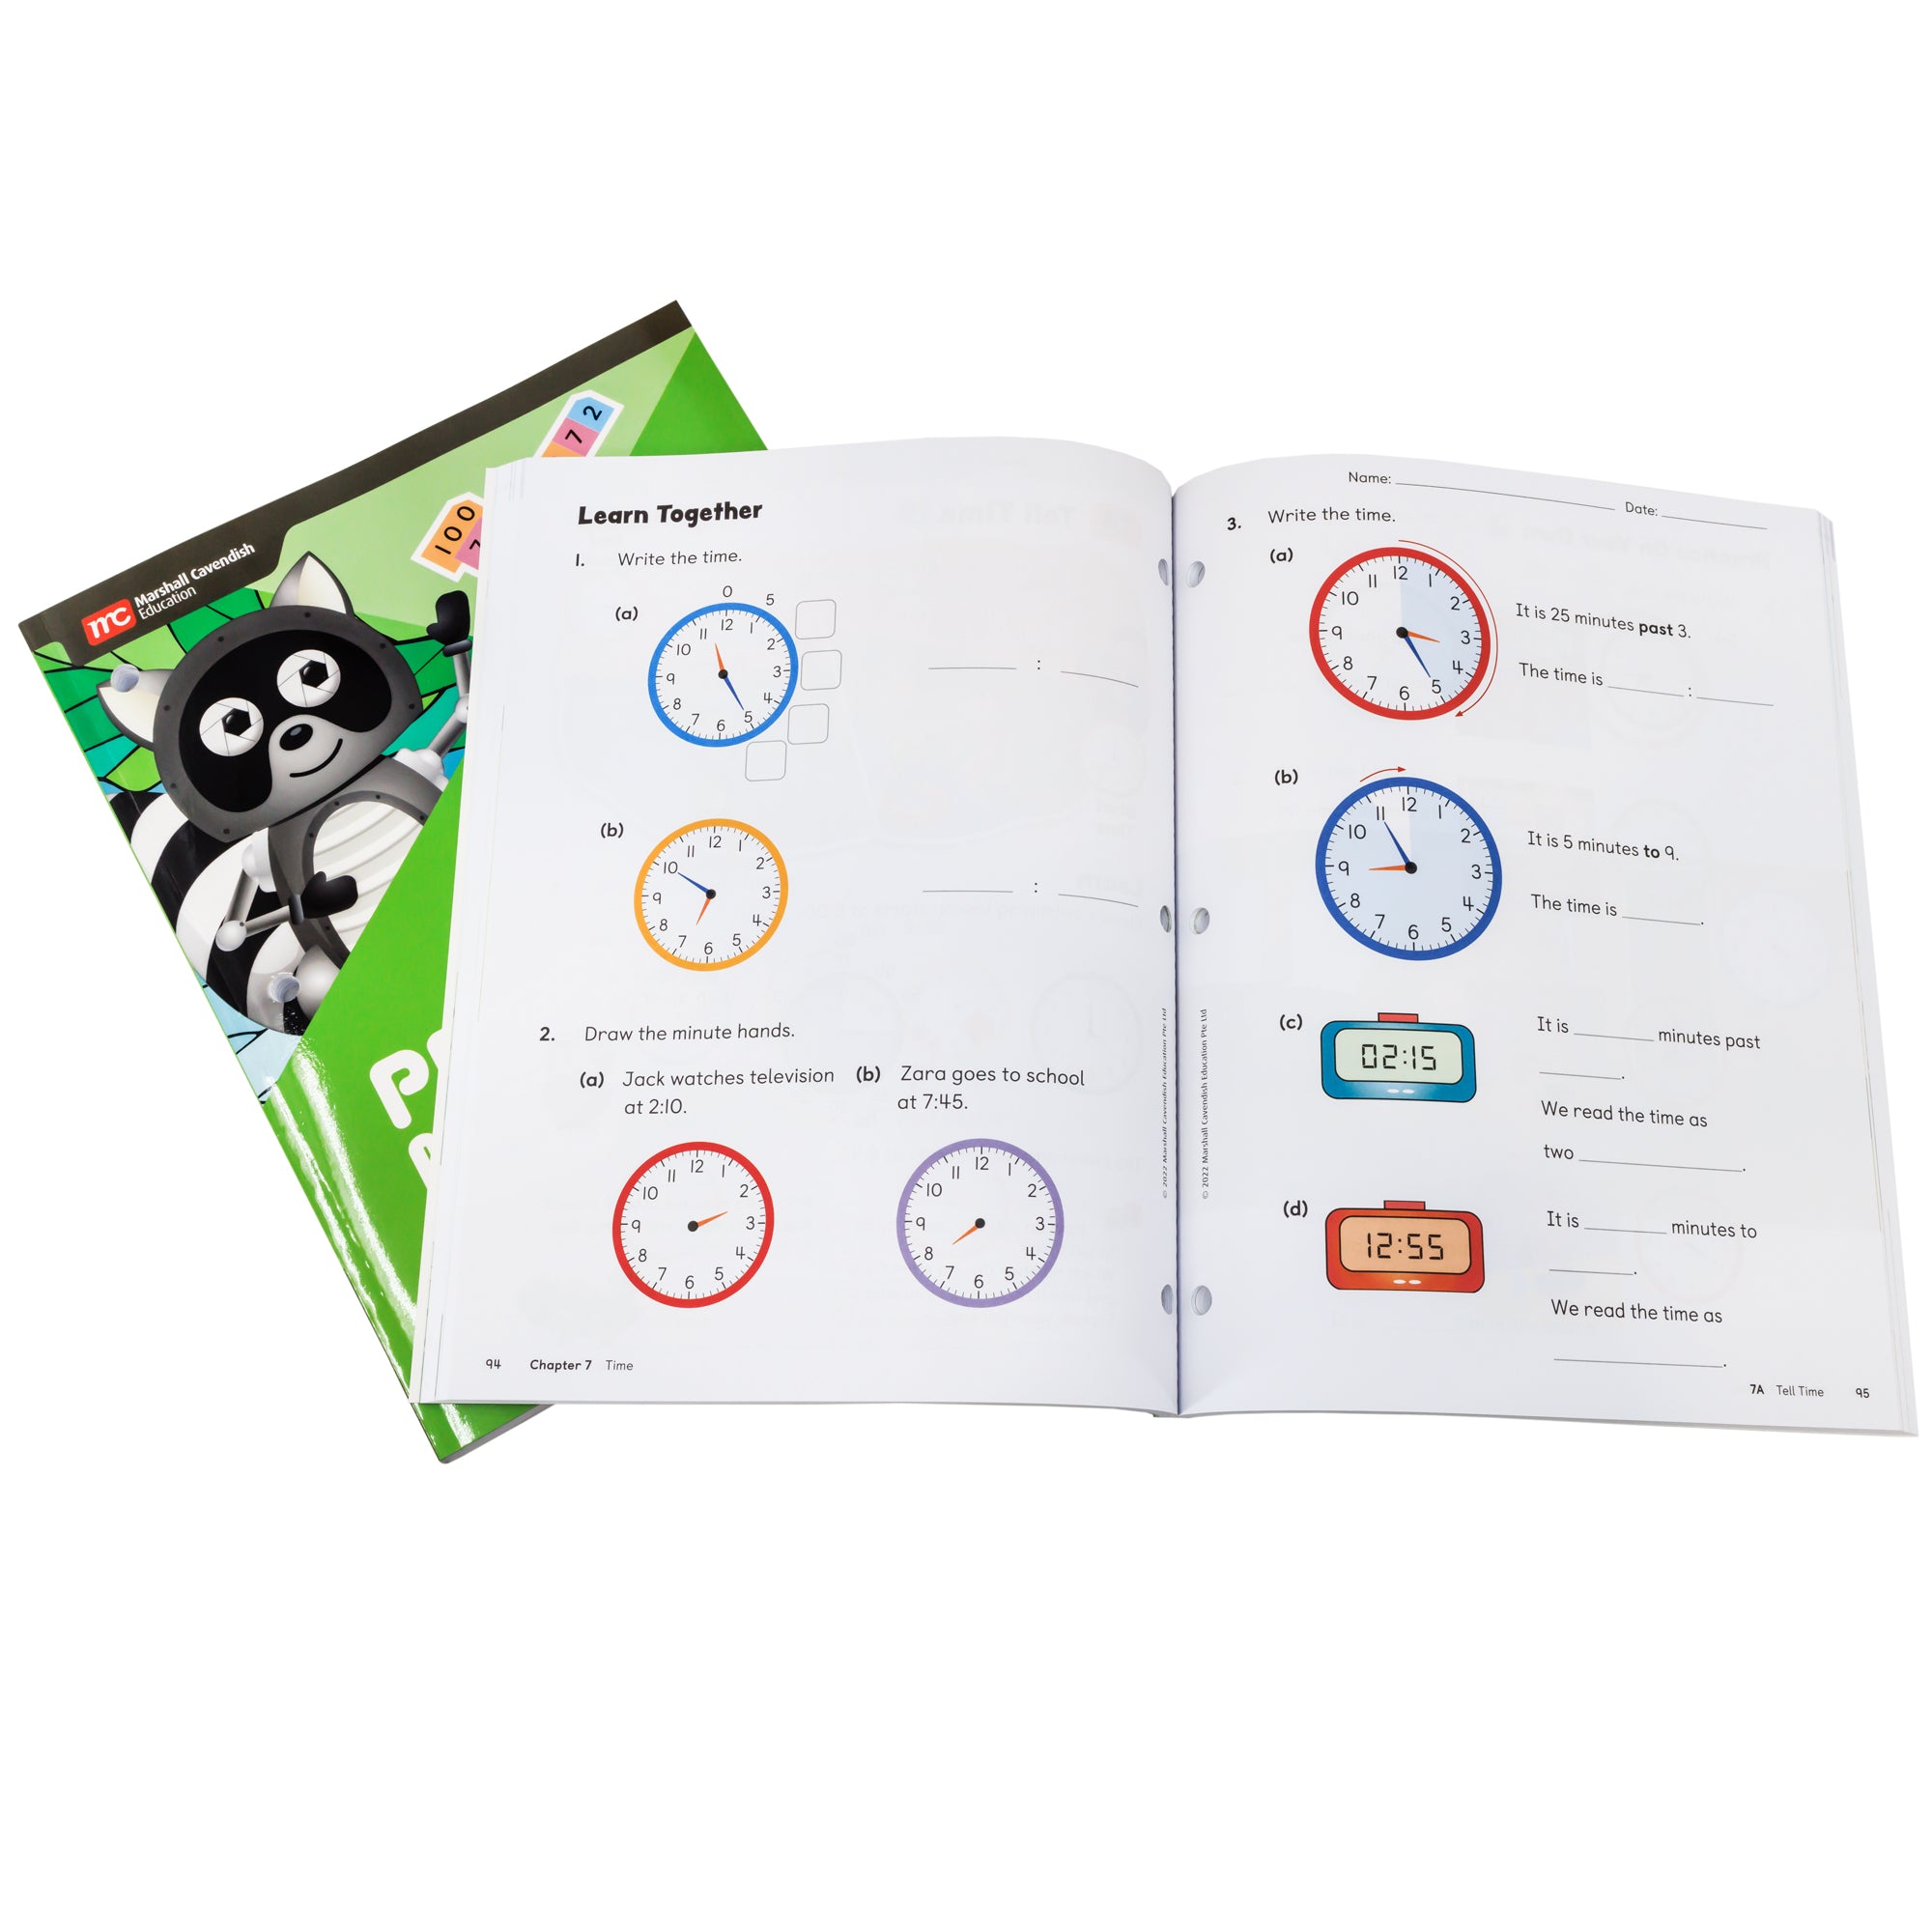 Singapore Primary Math second grade books. On top is an open book showing math problems with an illustrations of clocks with different times. Under the open book and to the left is a closed book with a racoon and green background.